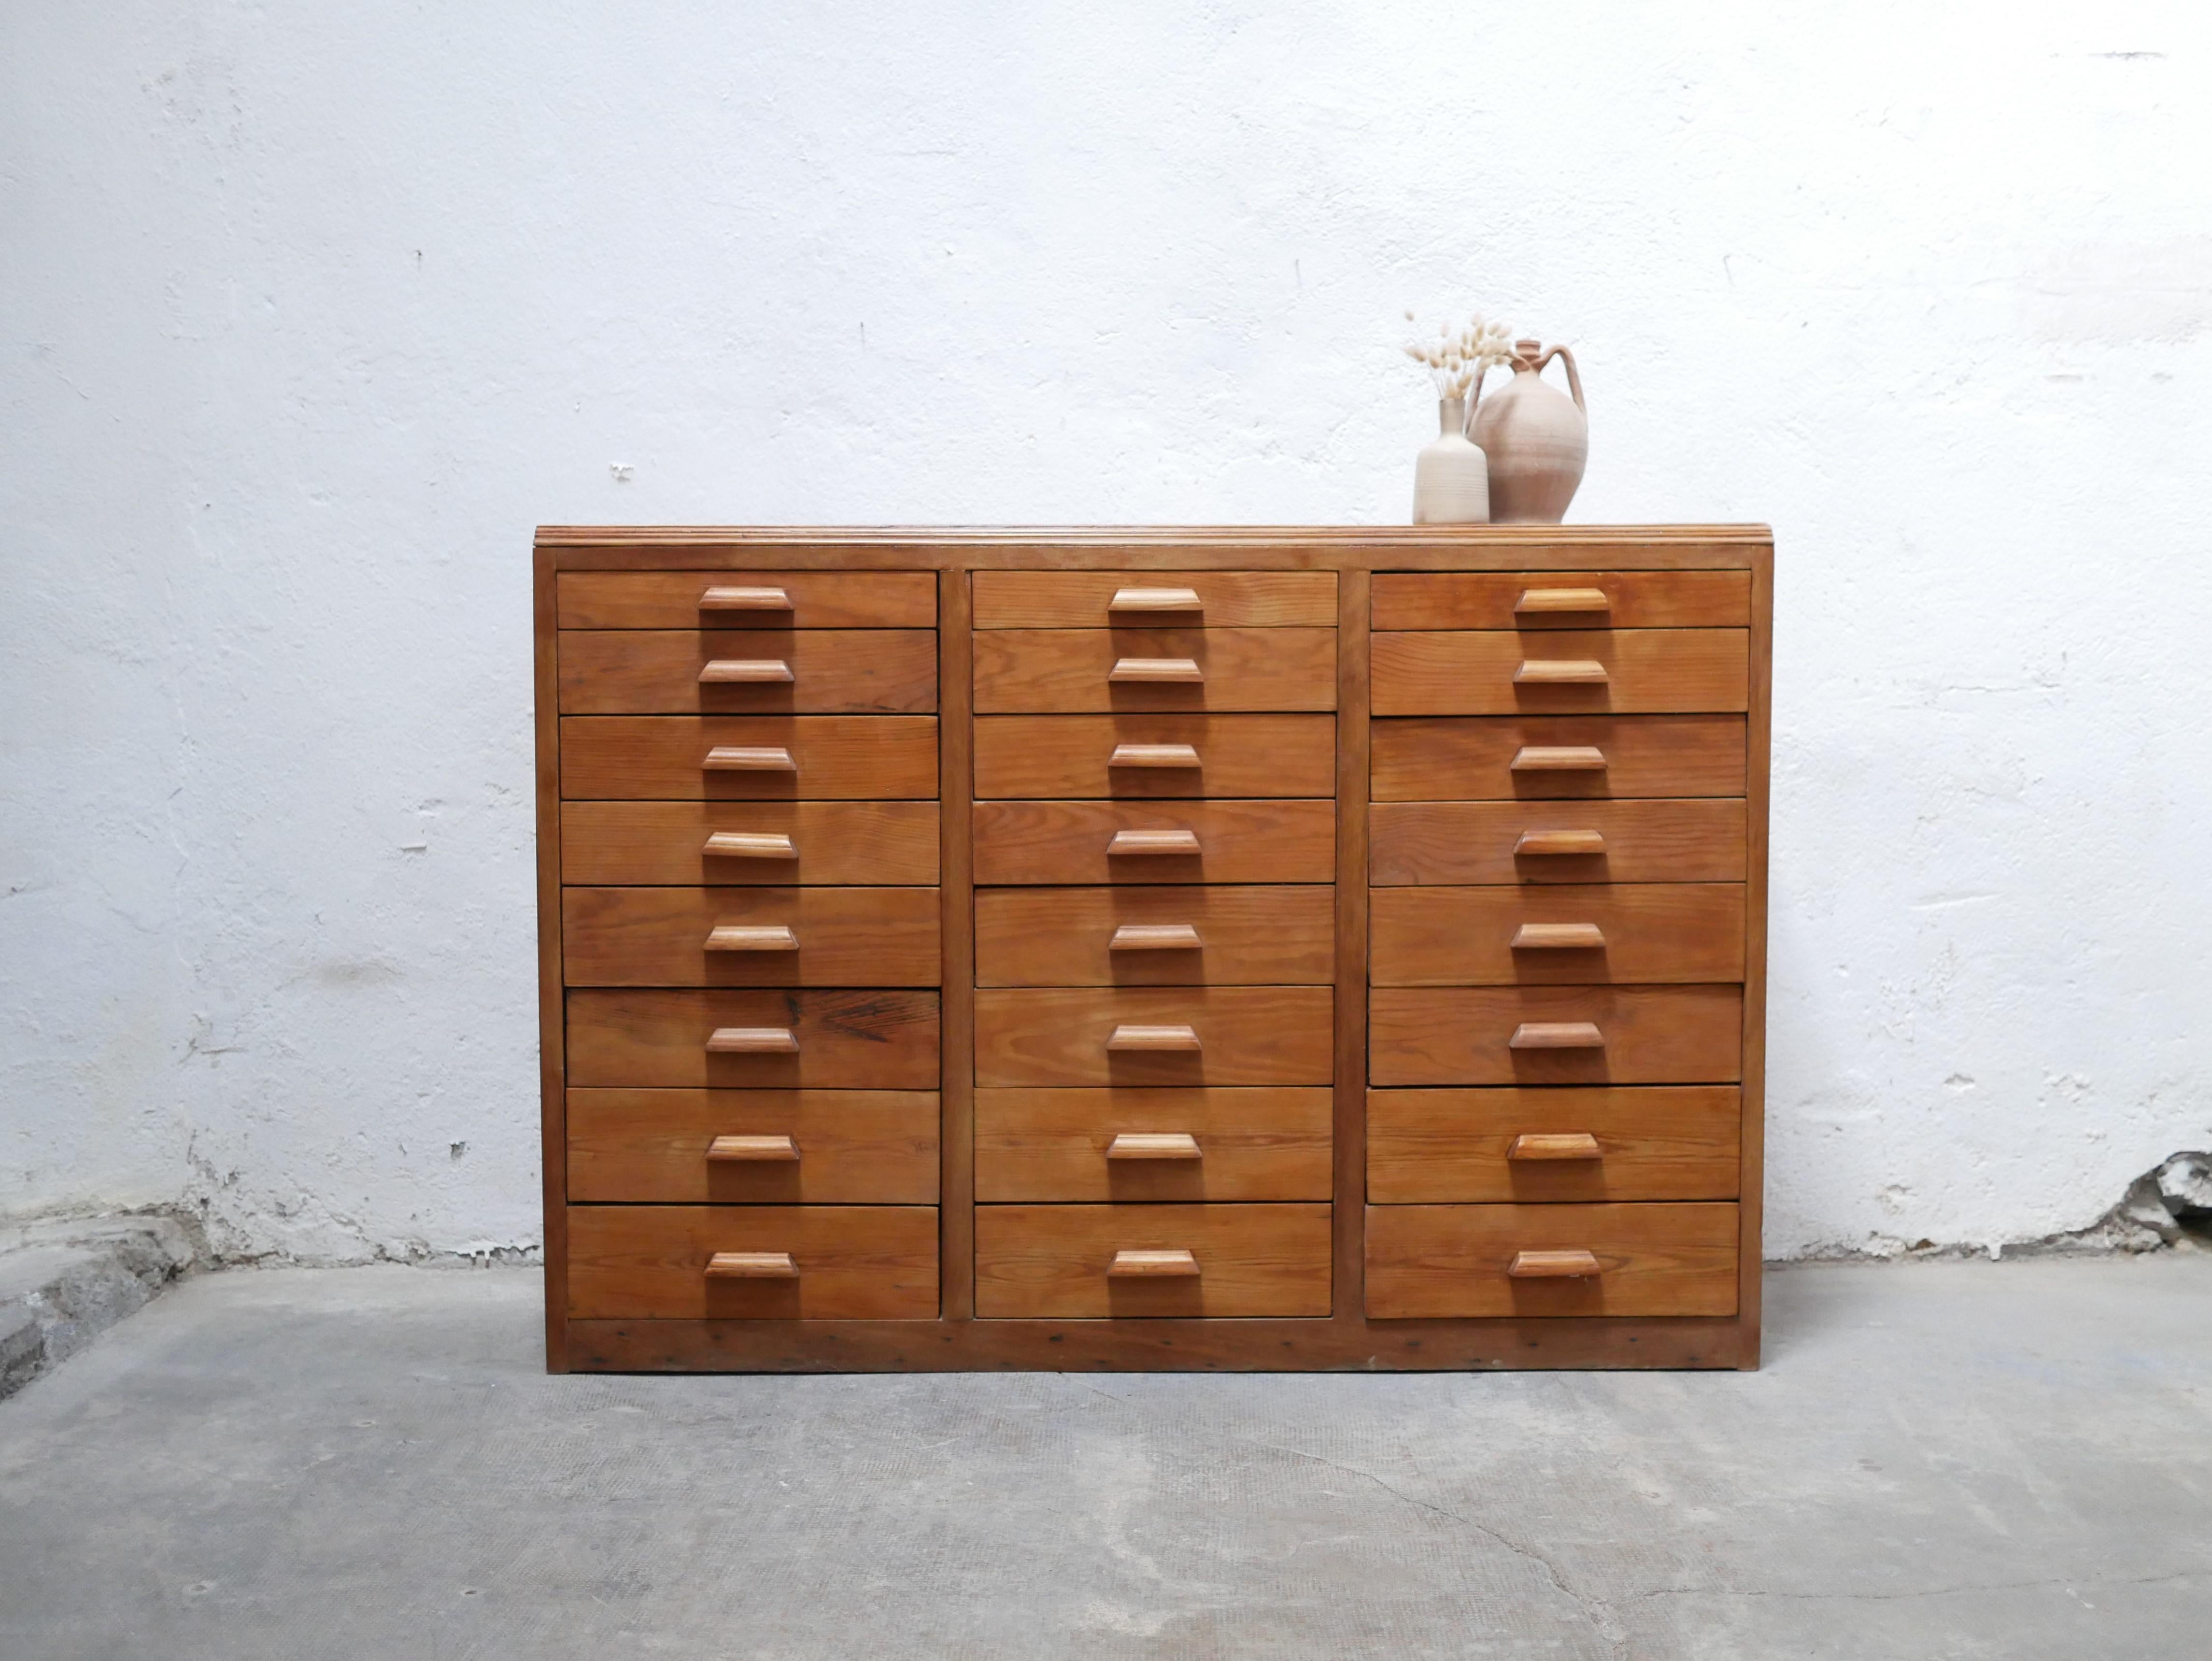 Professional furniture with wooden drawers dating from the 1950s.

Authentic, practical and aesthetic furniture. Its pretty color and lines give it a lot of character and elegance. Its numerous drawers offer a large storage capacity.
It will be